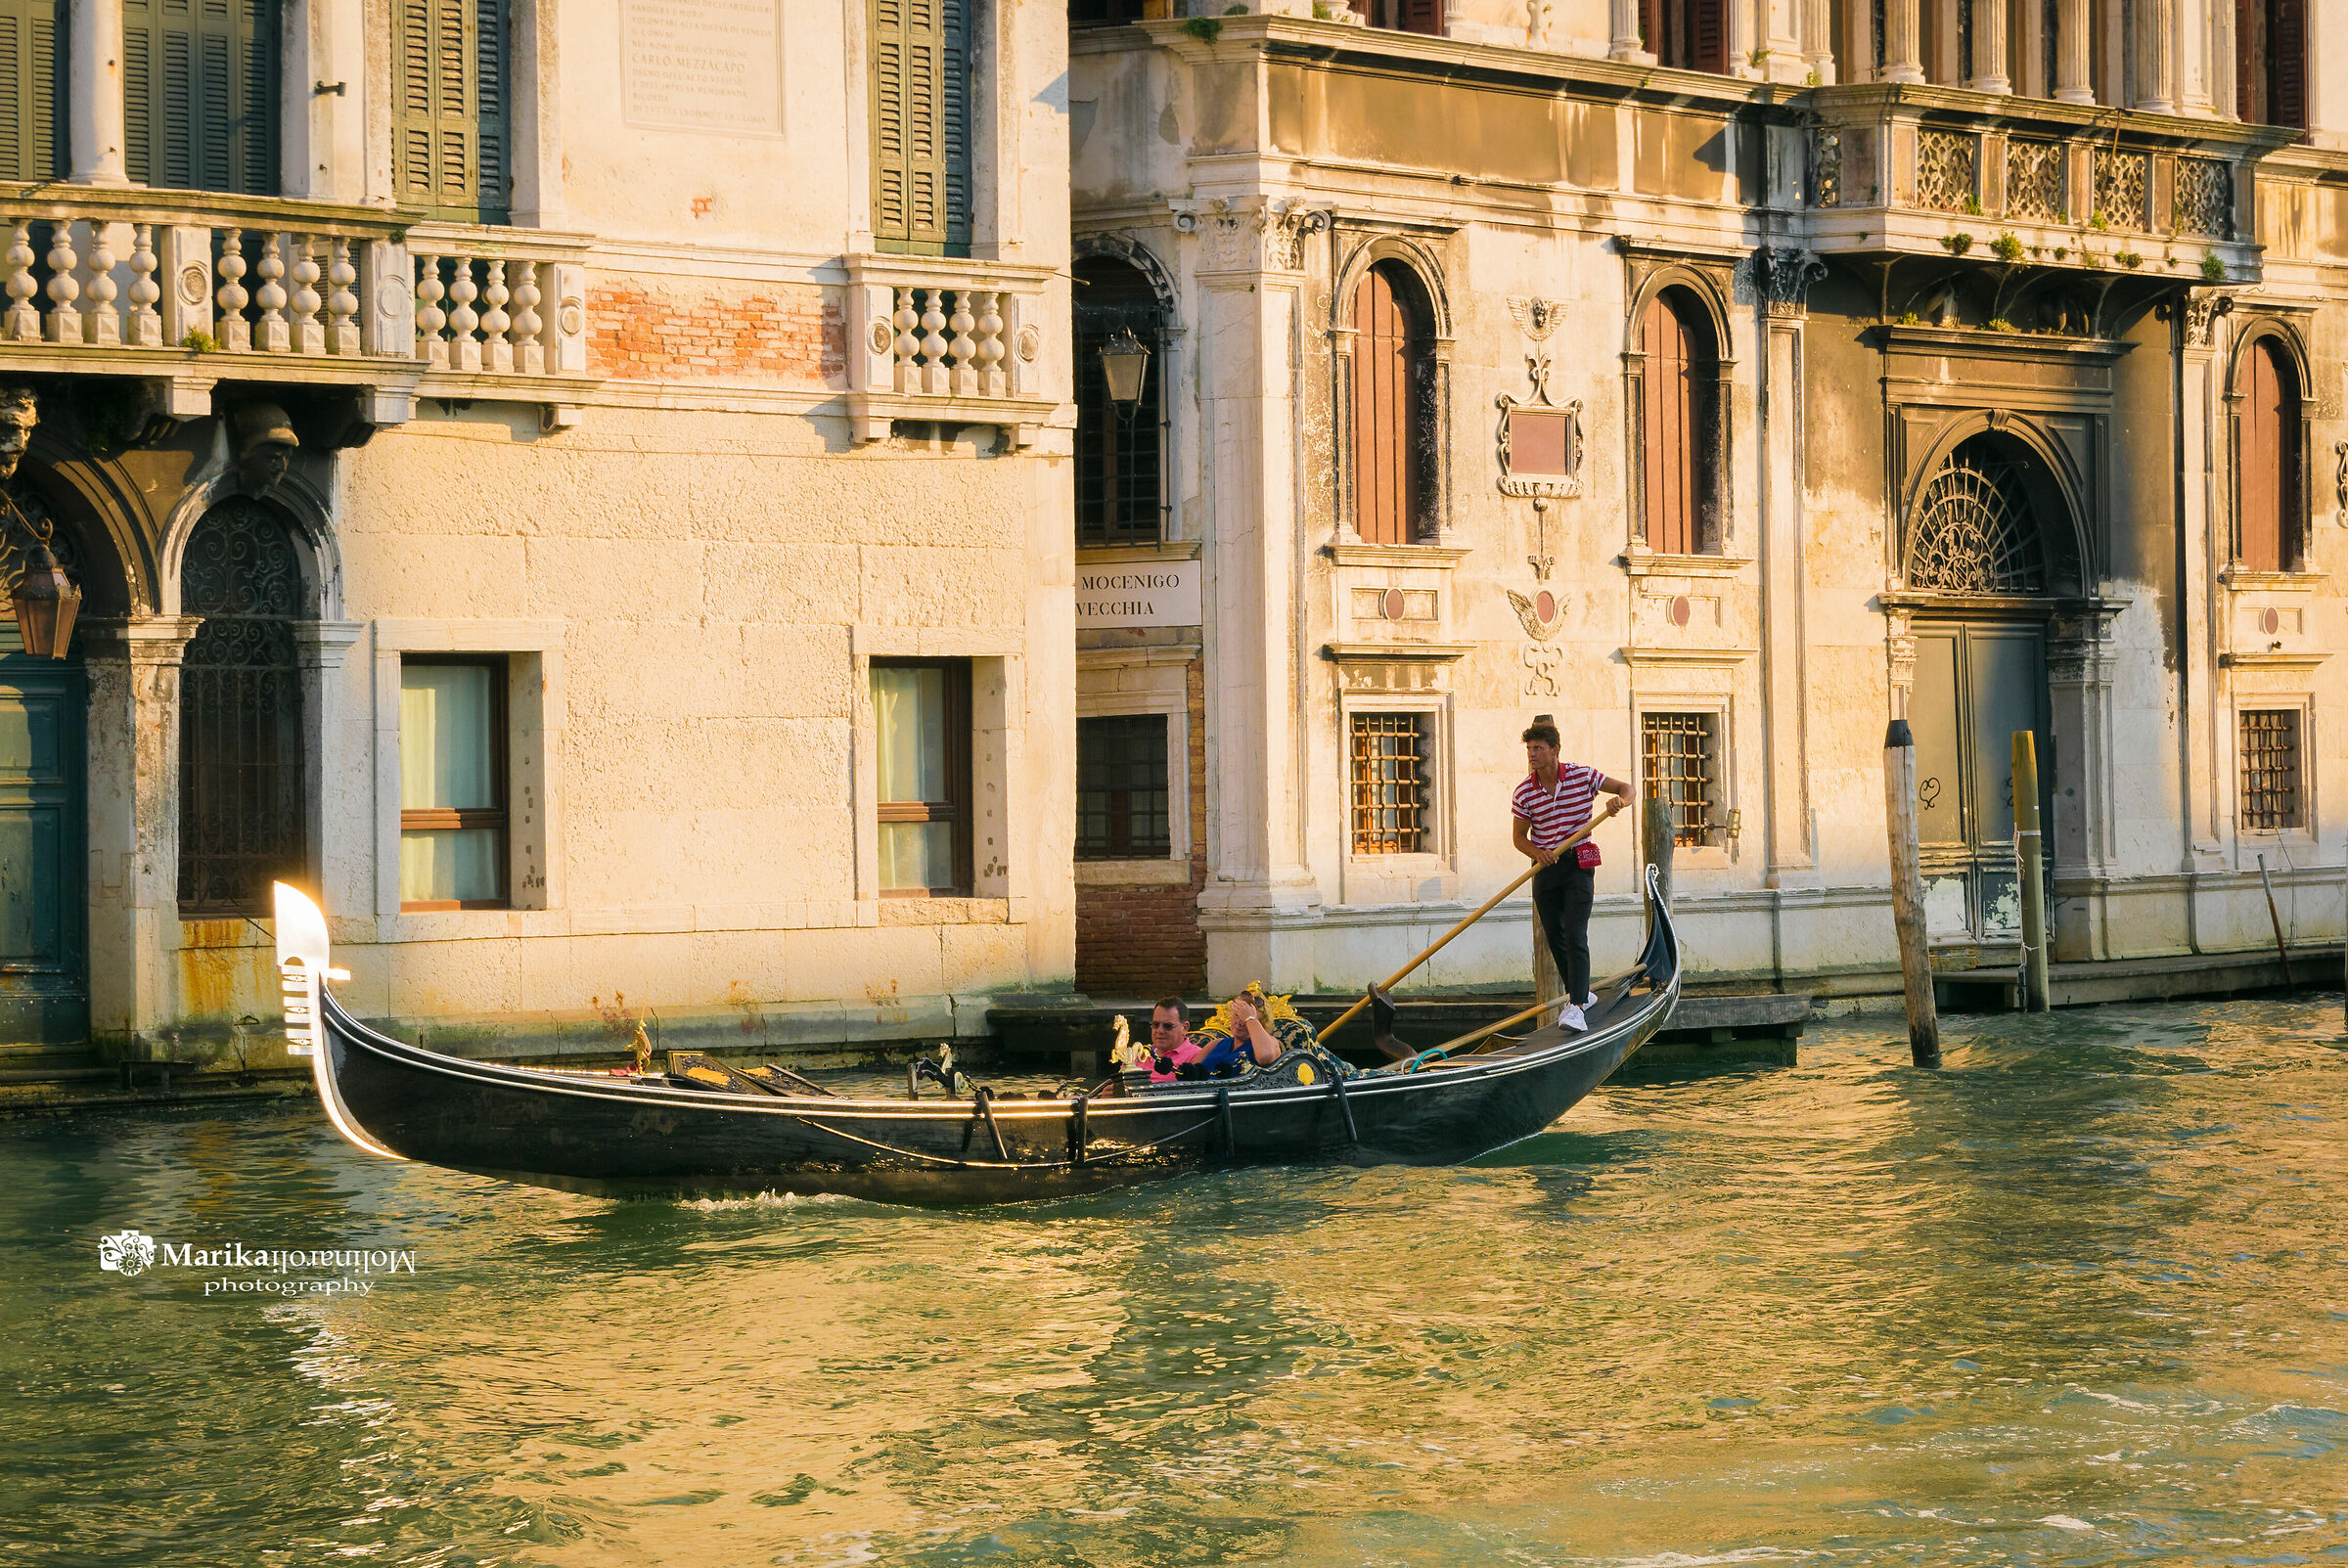 The gondolier...